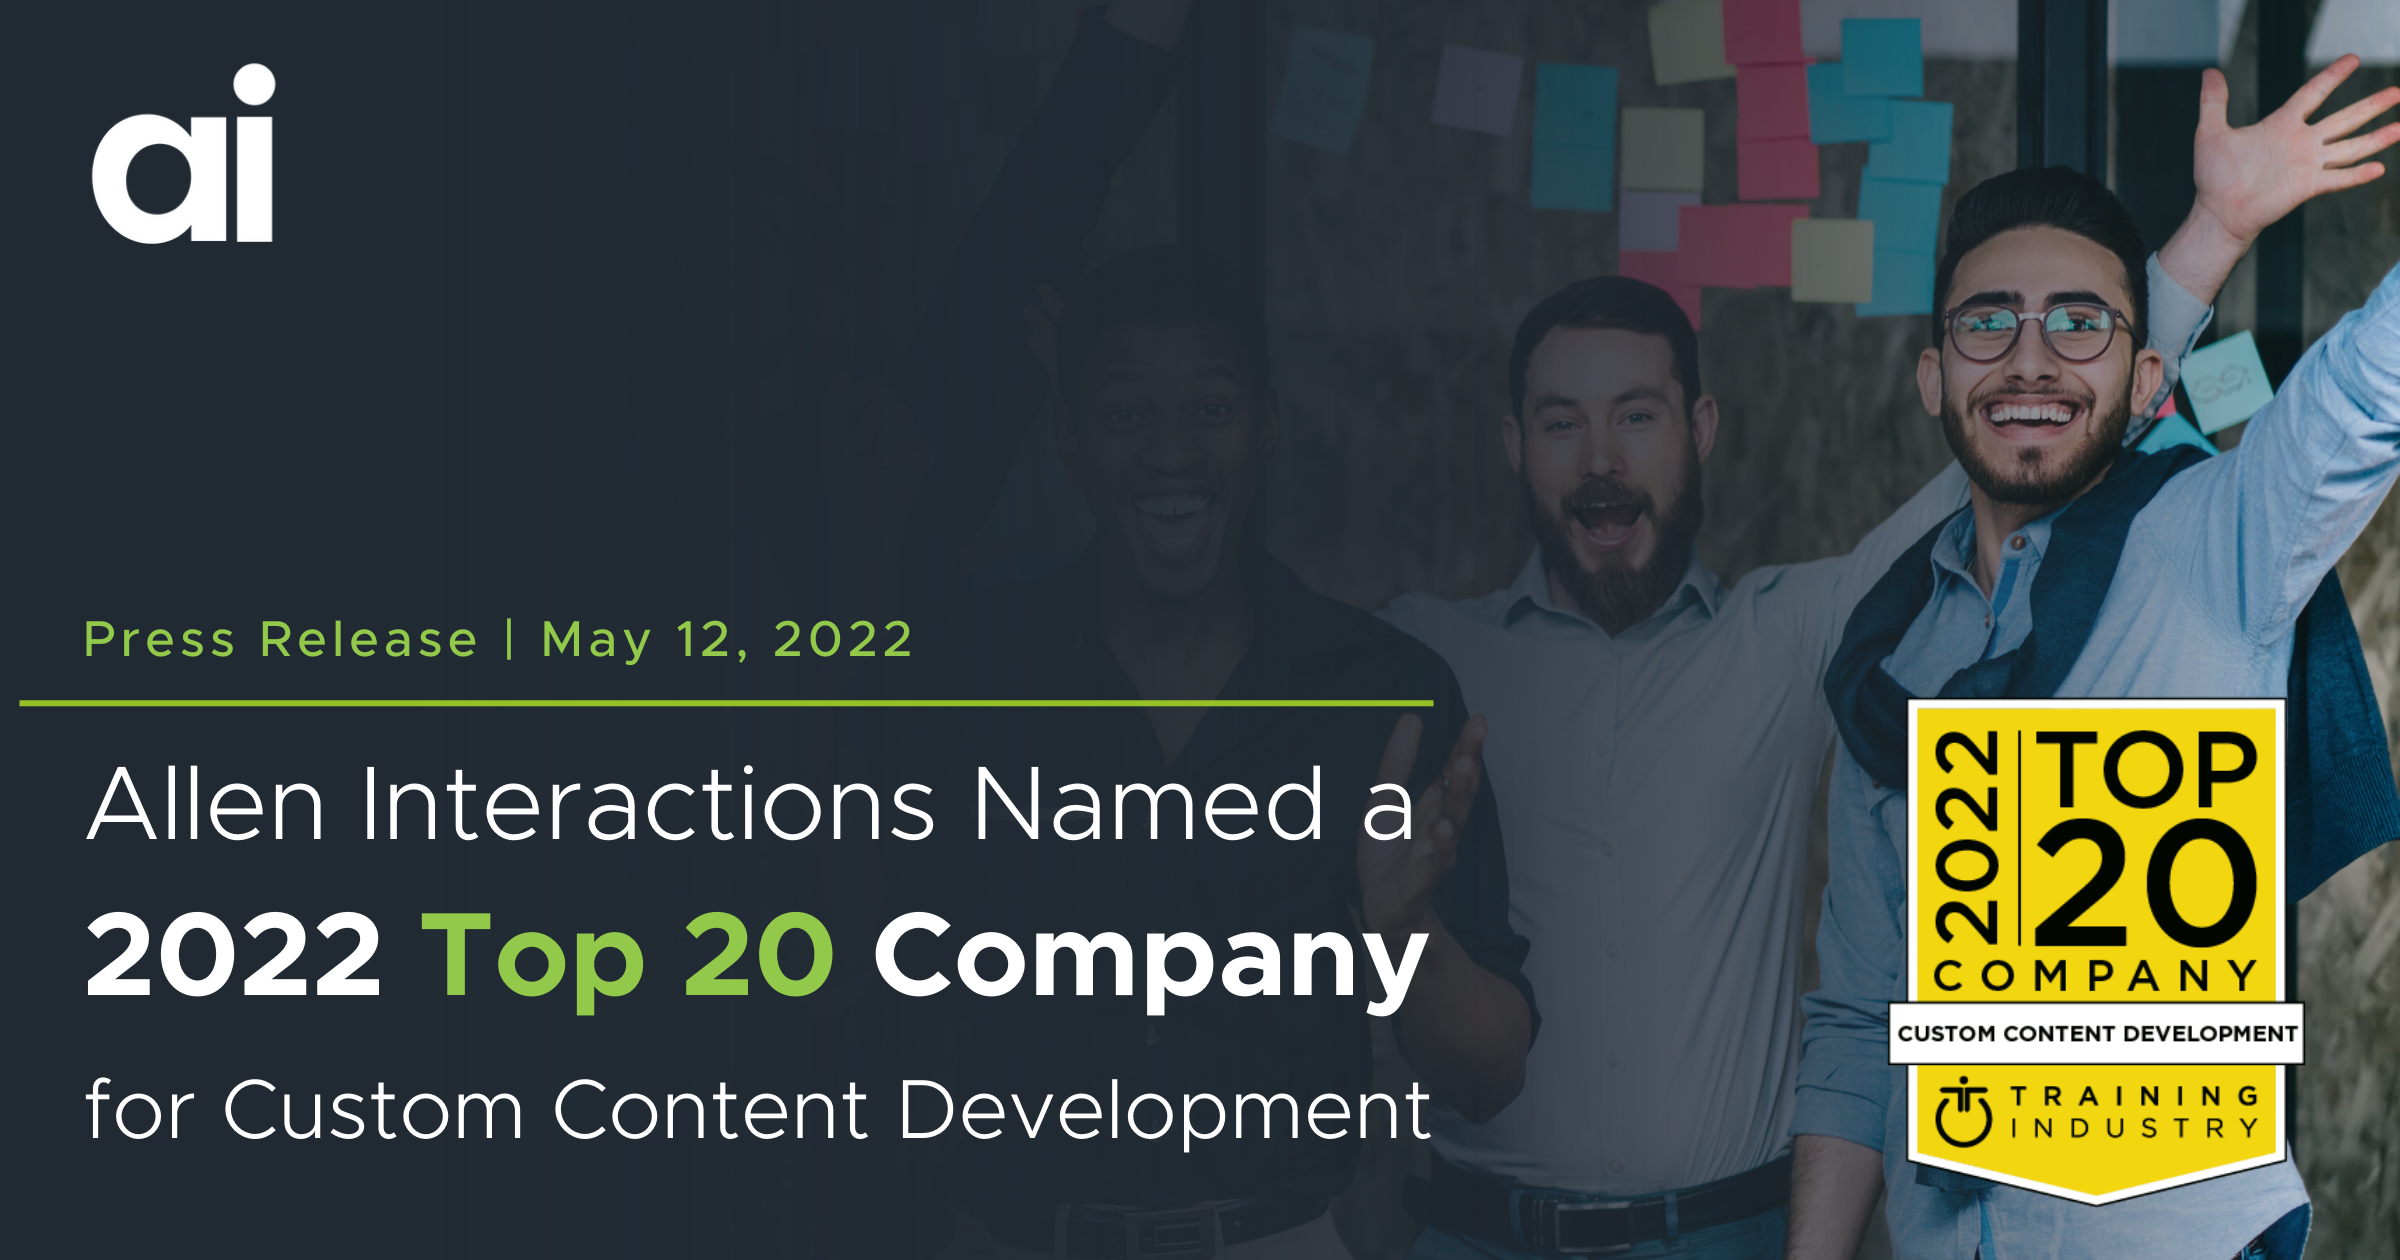 Allen Interactions Recognized as a 2022 Top 20 Custom Content Development Company